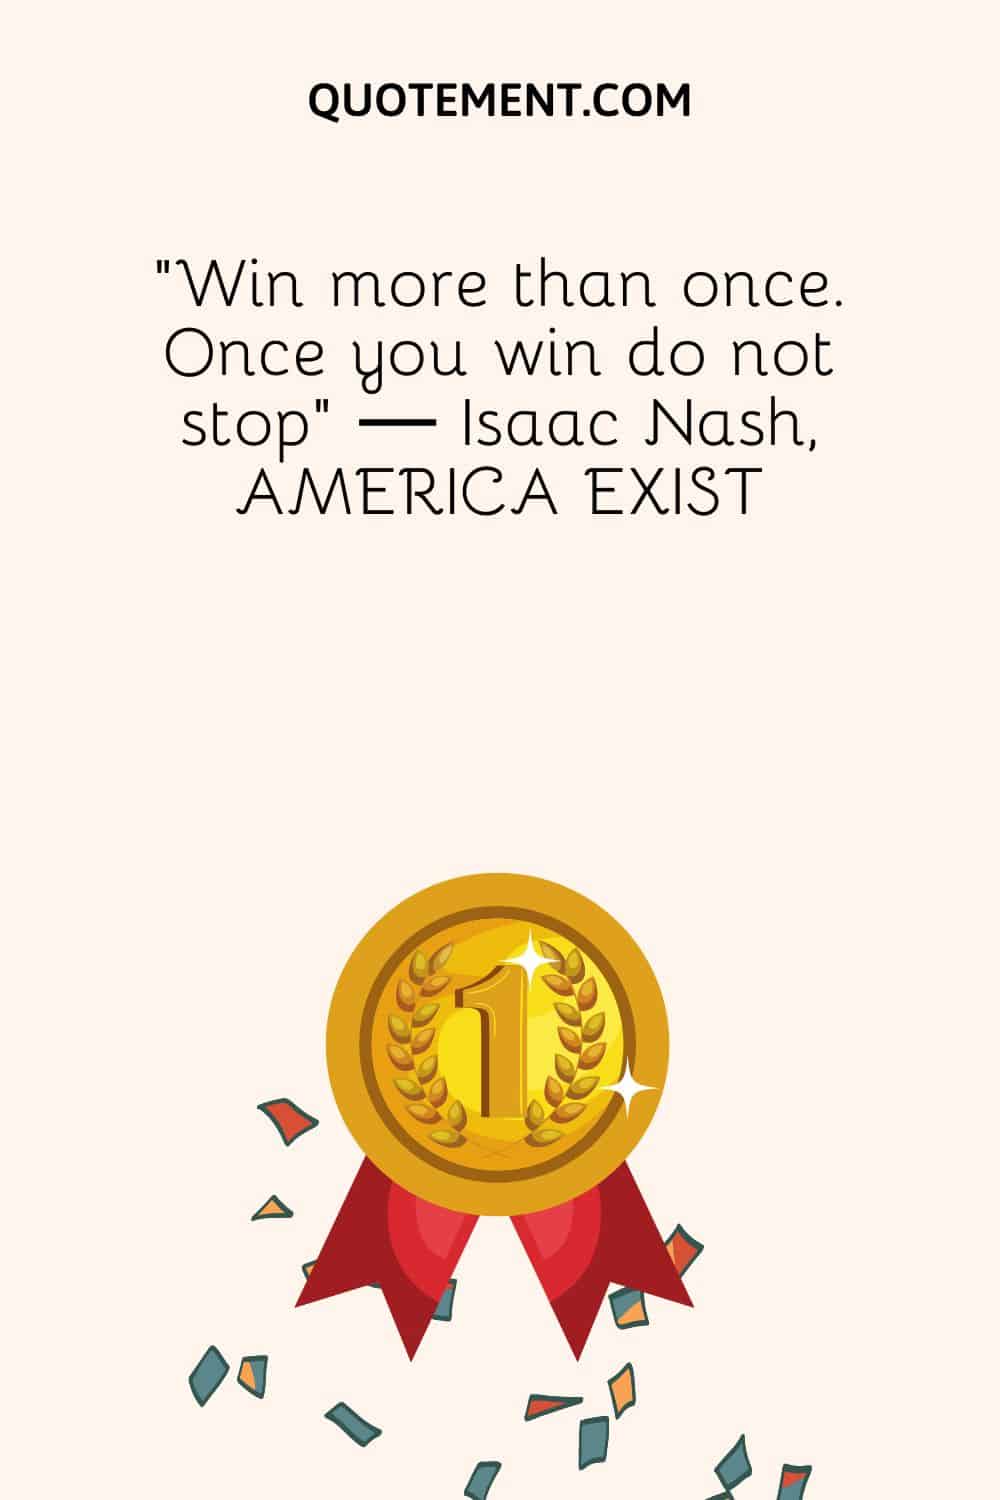 “Win more than once. Once you win do not stop” ― Isaac Nash, AMERICA EXIST